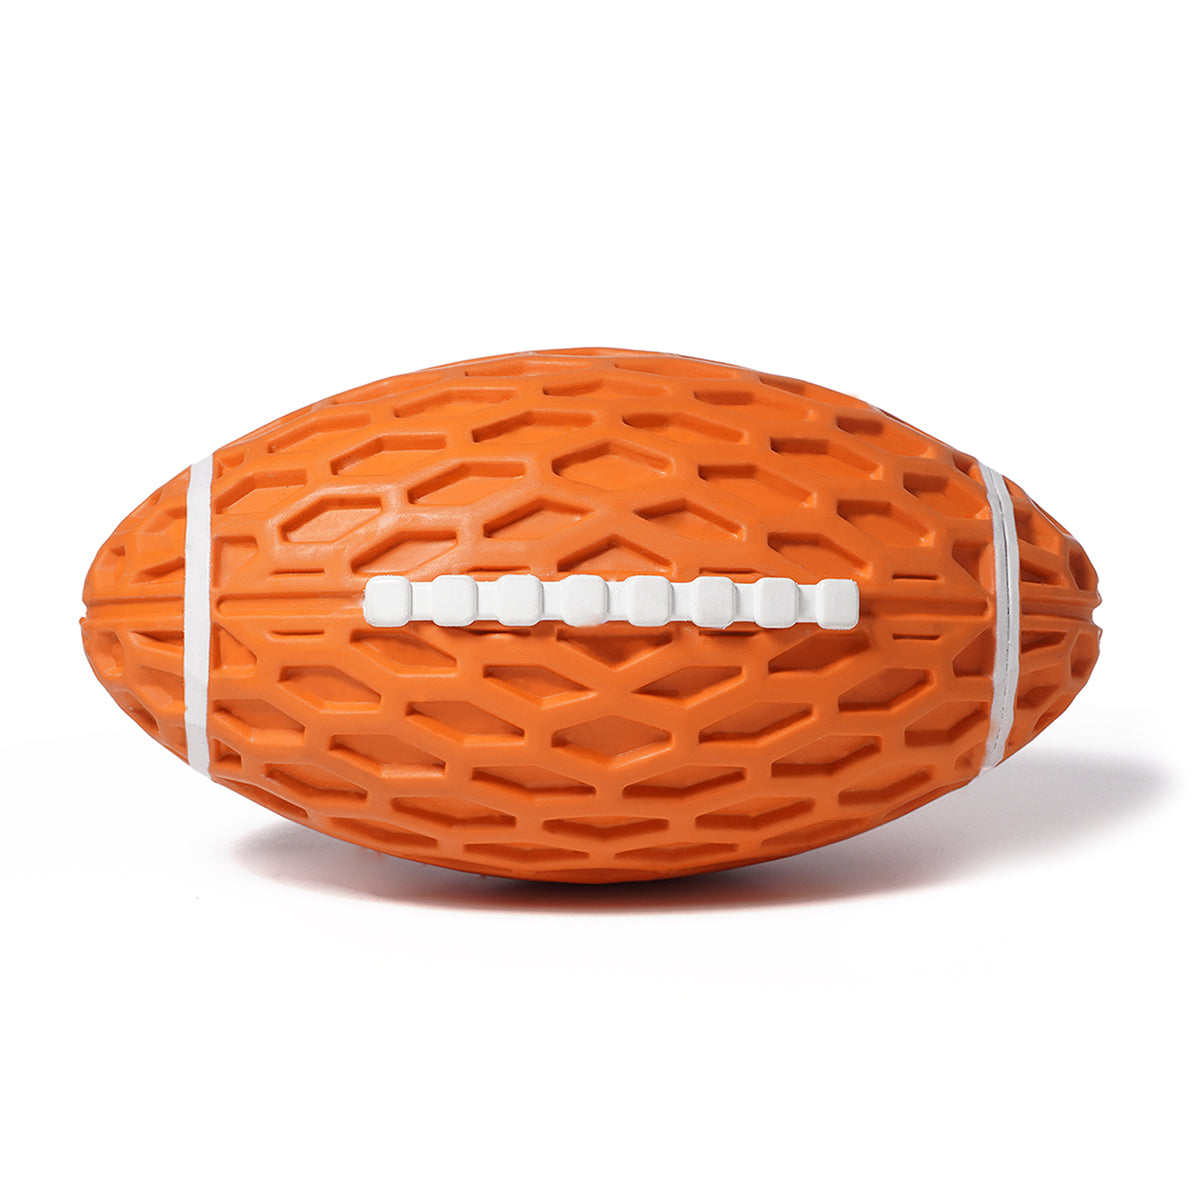 Beniqu Rubber Chew Football Ball Pet Dog Toy with Squeaker